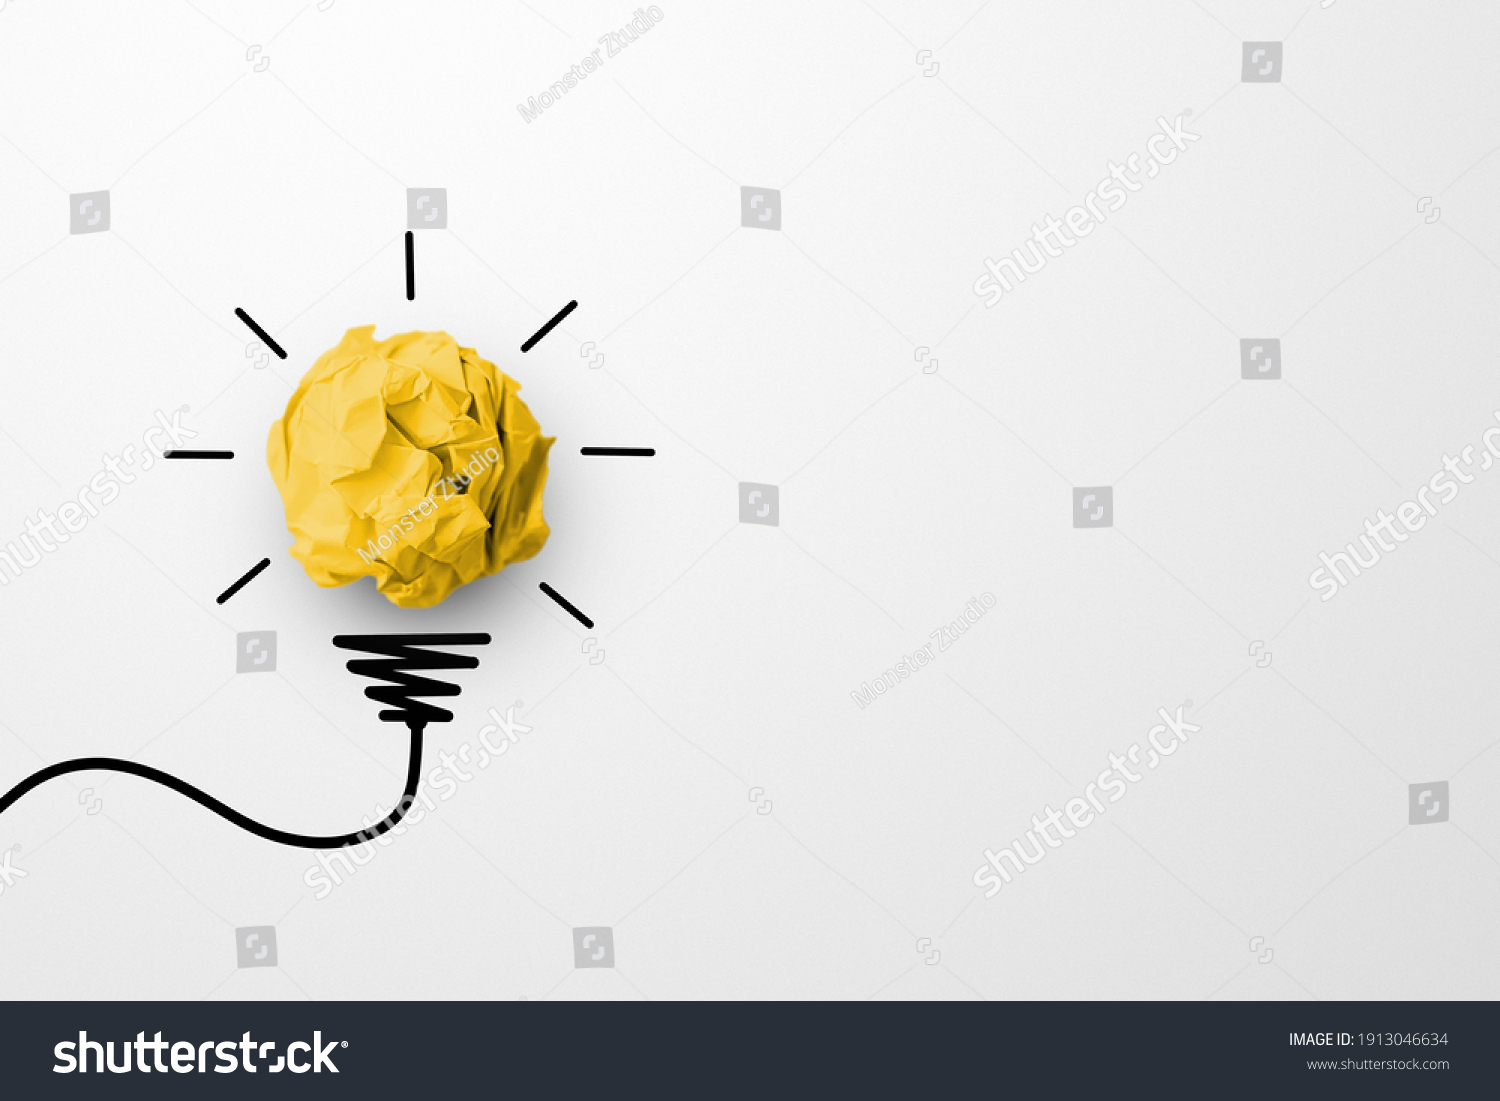 Creative thinking ideas and innovation concept. Paper scrap ball yellow colour with light bulb symbol on white background #1913046634